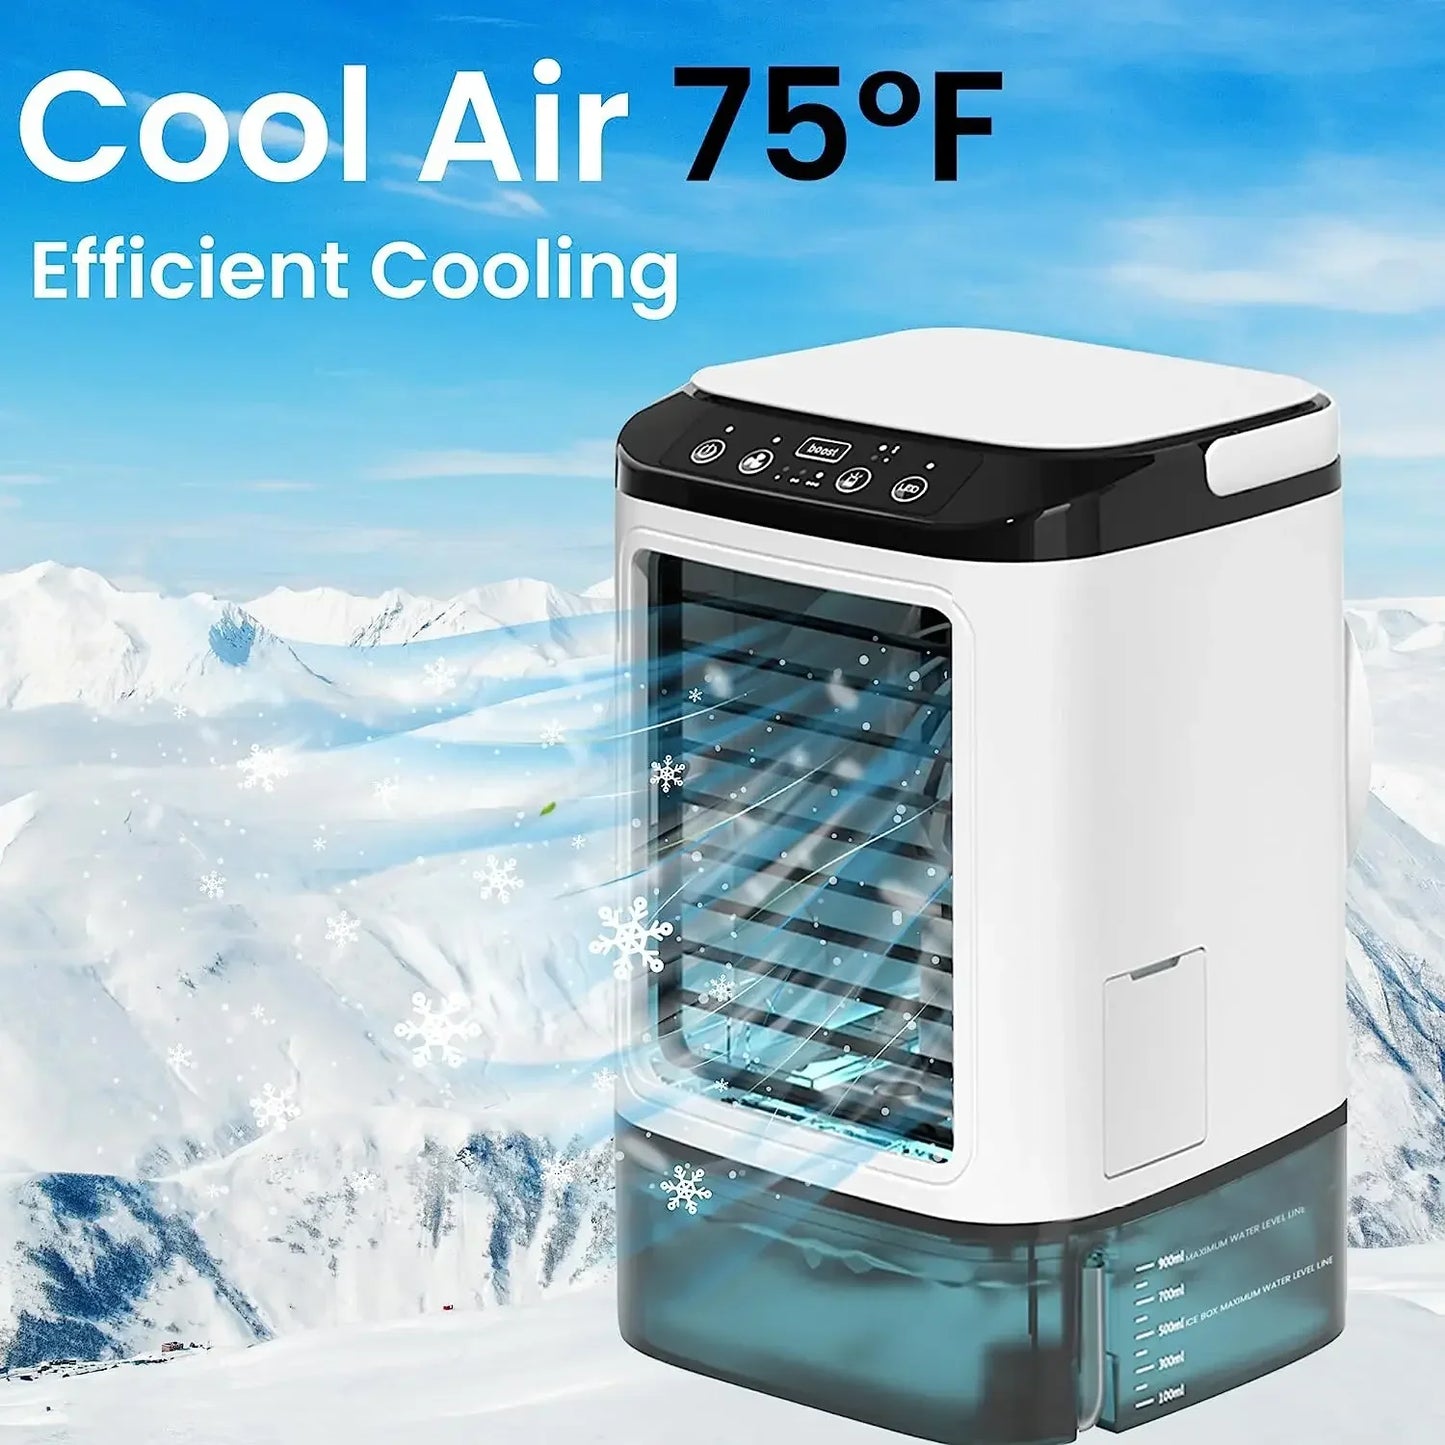 Air Conditioner Portable Fan Desktop Dual Spray Ultrasonic Atomization 3-Speed Mute Air Cooler Night Light Electric Fan for Home

Air Conditioner Portable Fan
Night Light Electric Fan
3-Speed Mute Air Cooler